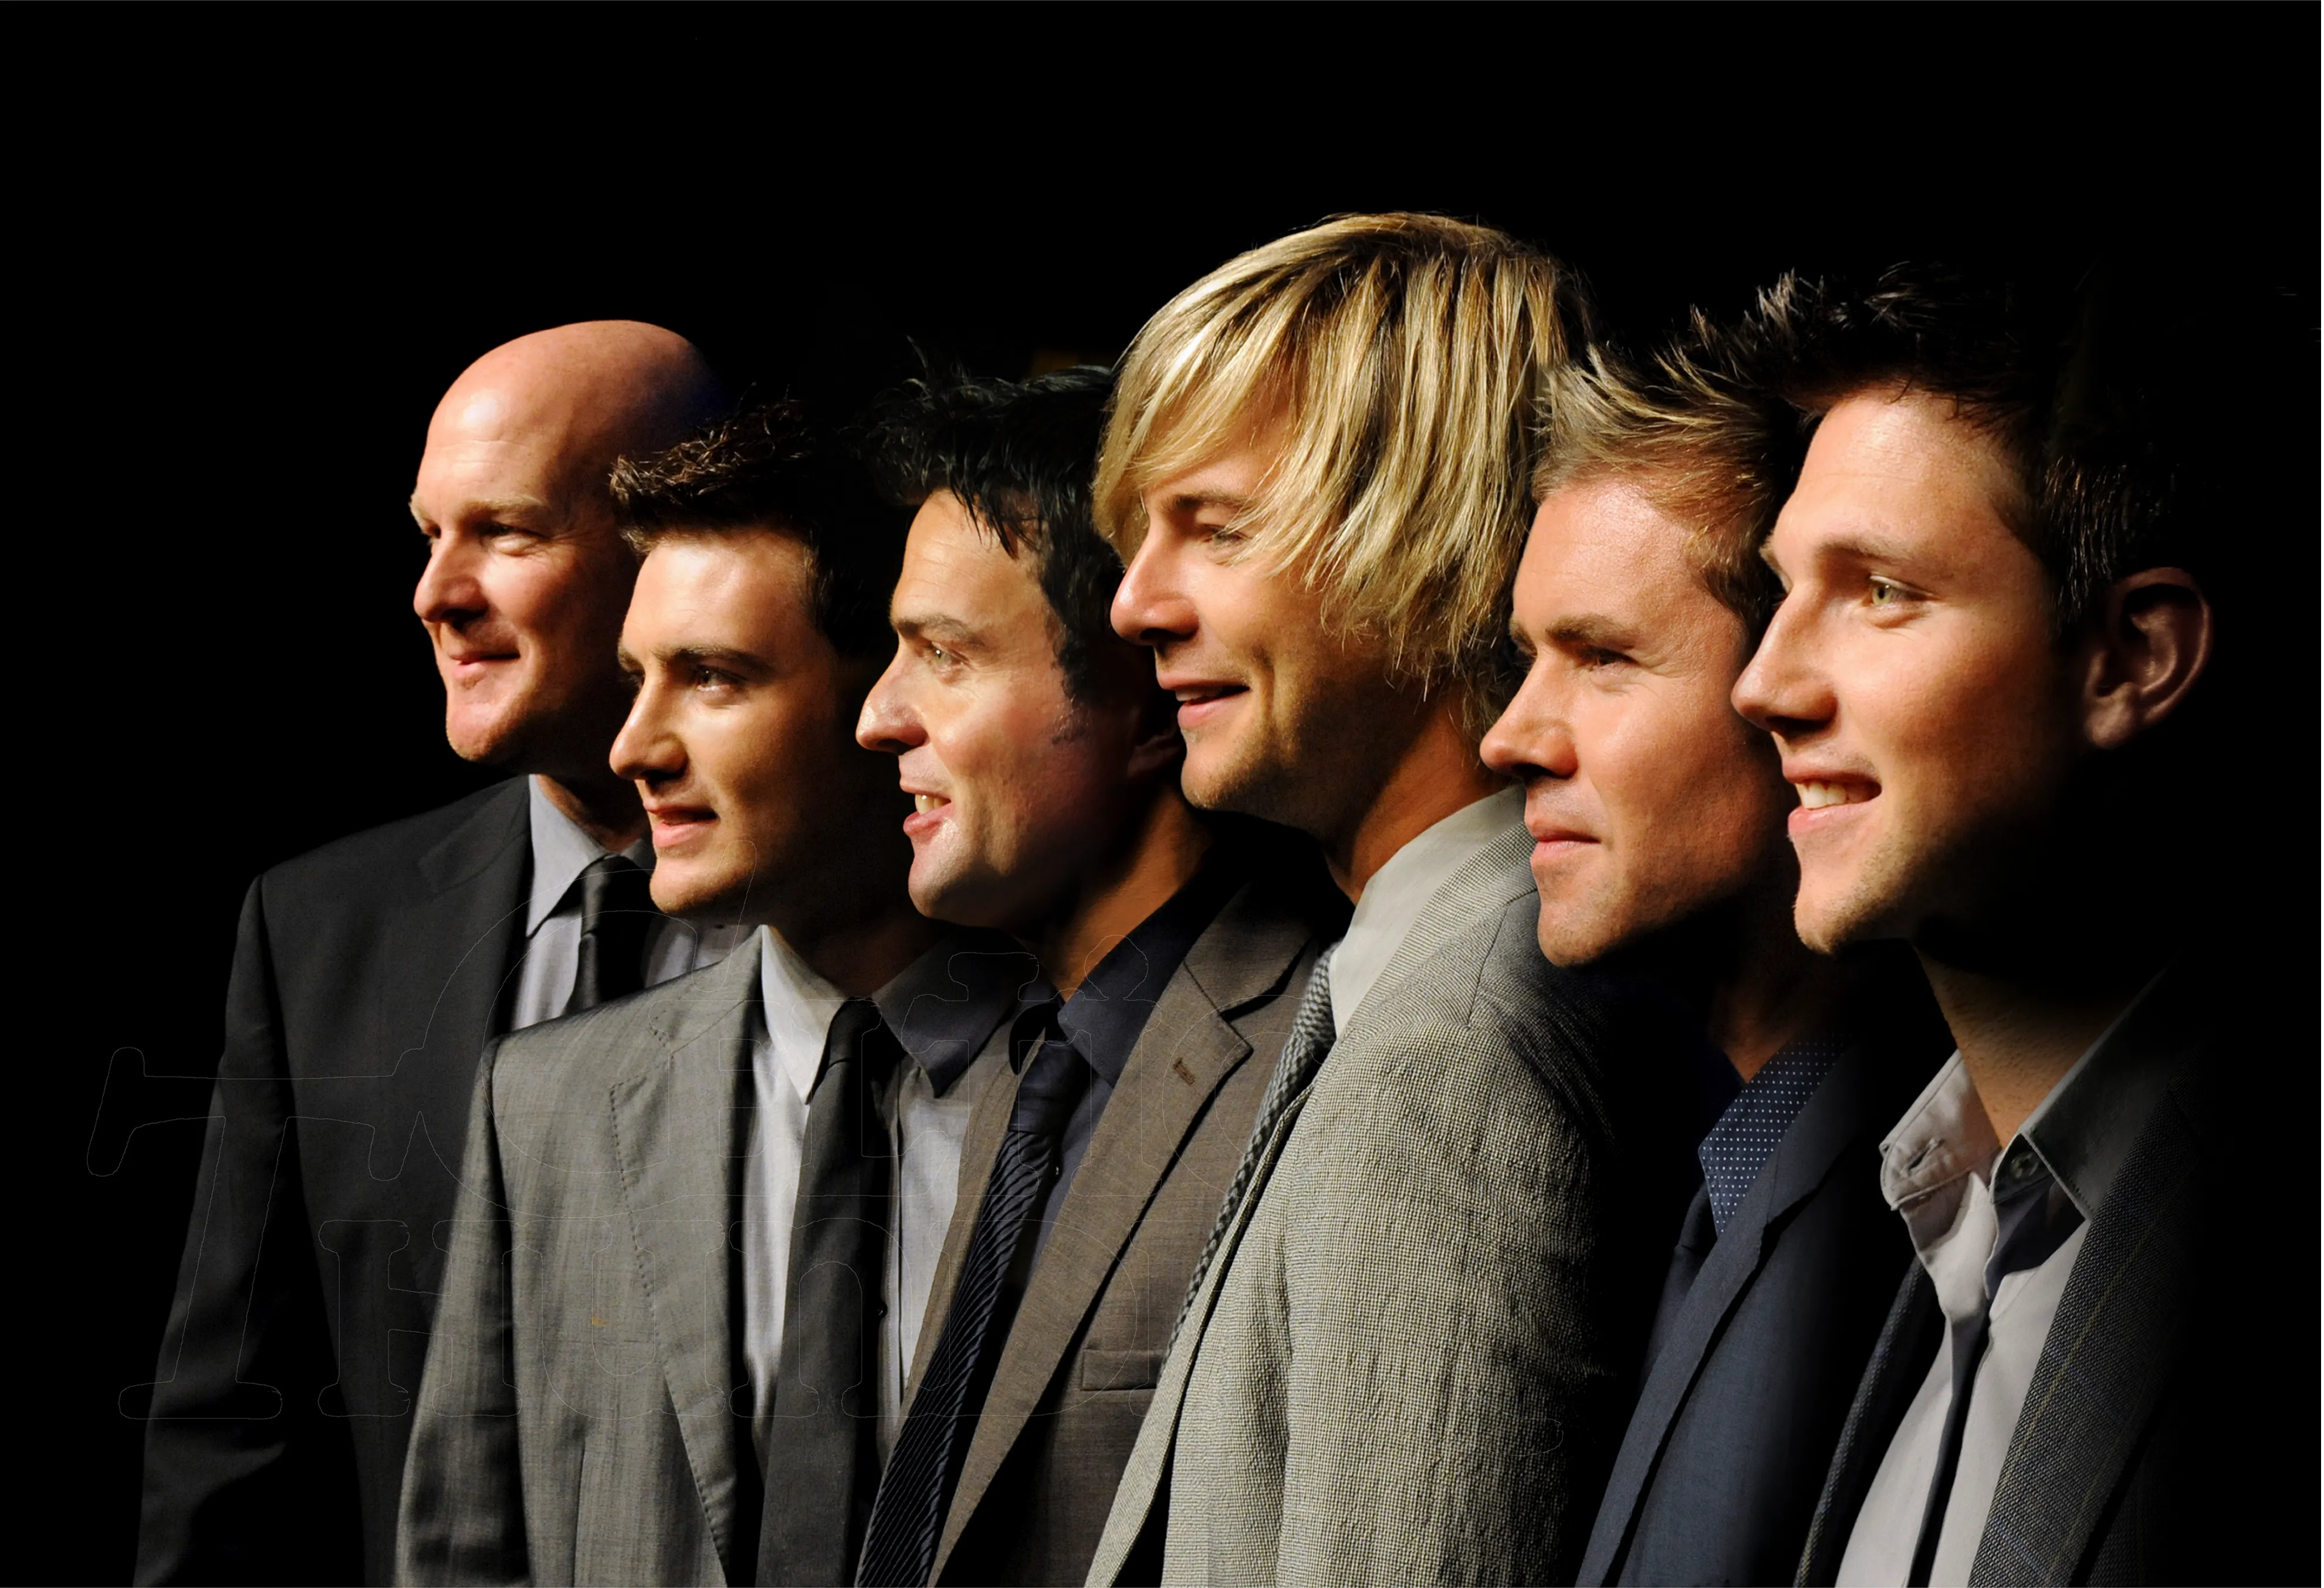 Who are the members of Celtic Thunder? Their Age, Bio, Wiki